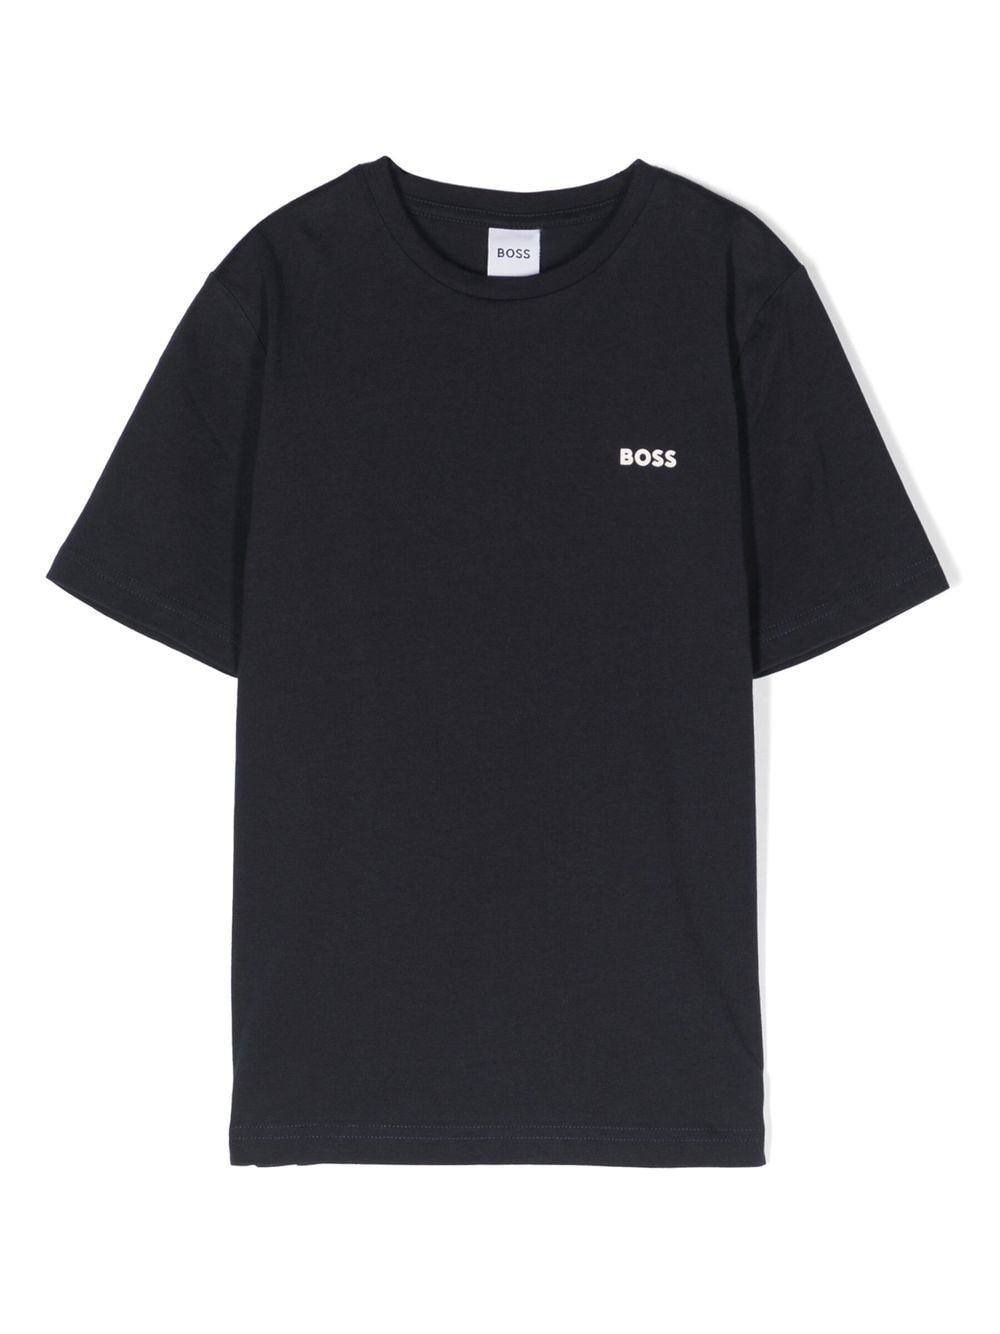 Blue t-shirt for boys with small logo